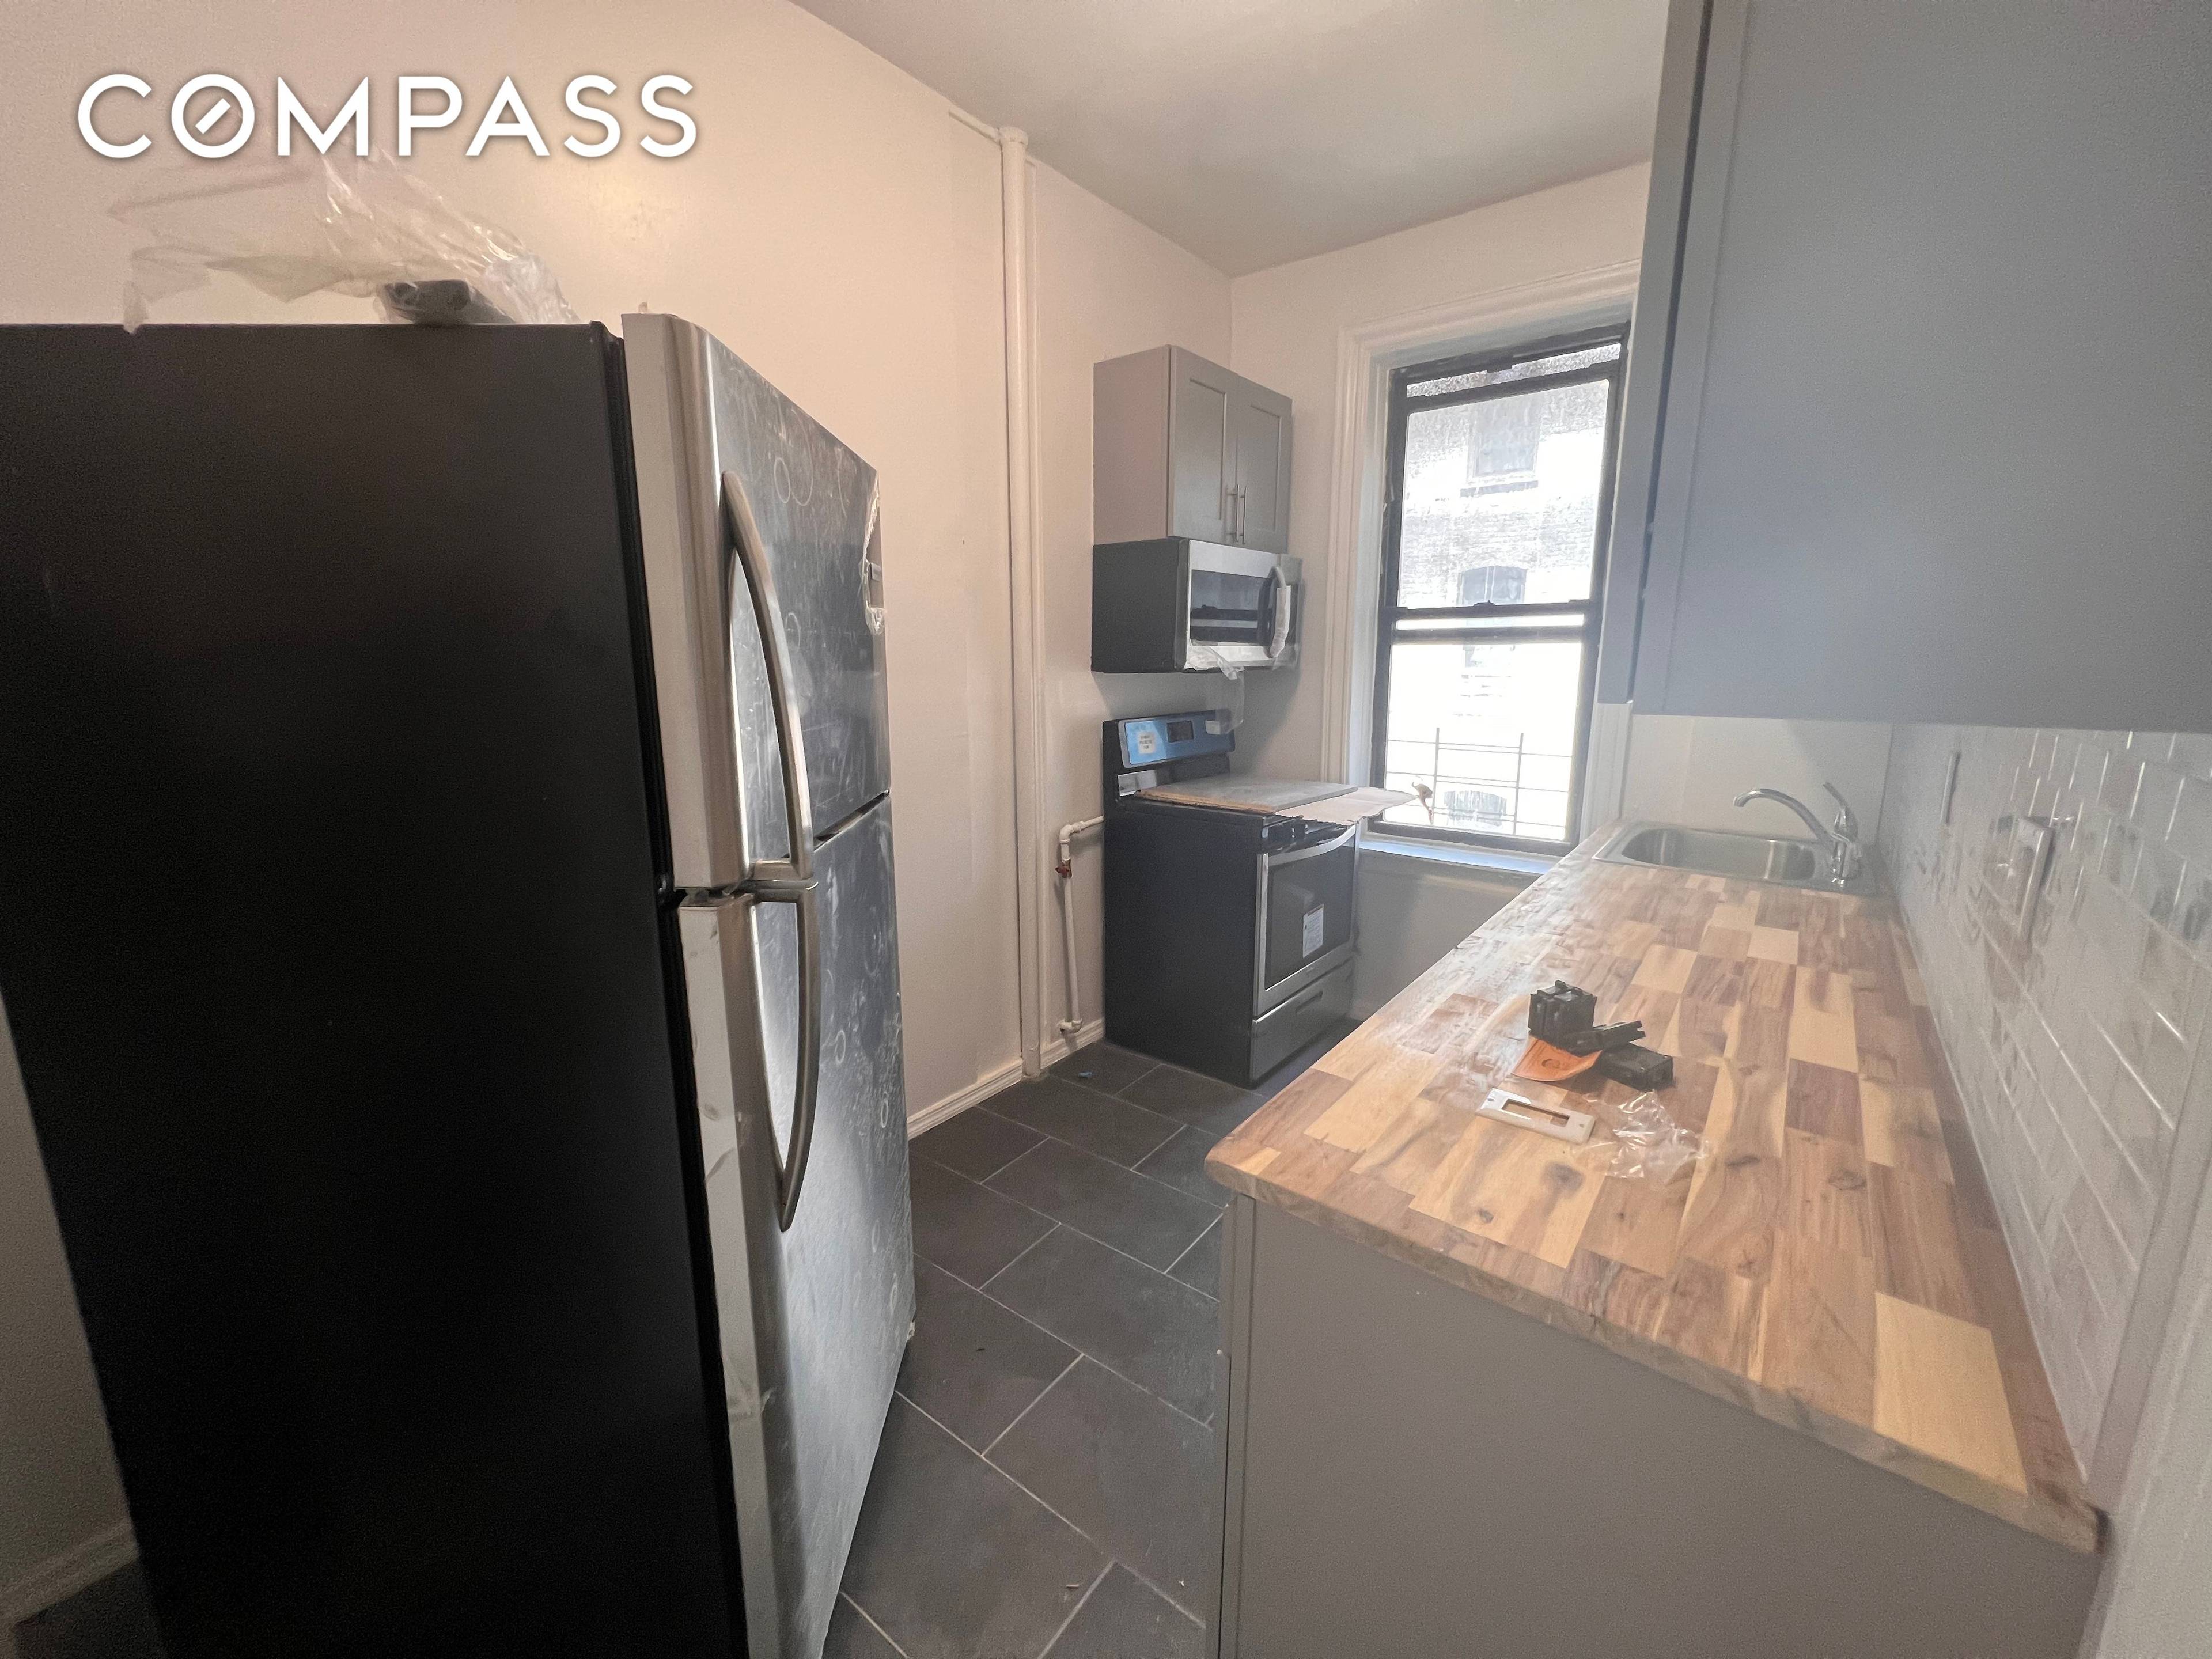 THE TENANT PAYS THE BROKER S FEE We have an enormous, recently renovated super sunny three bedroom apartment available for rent on the second floor in a street facing walk ...